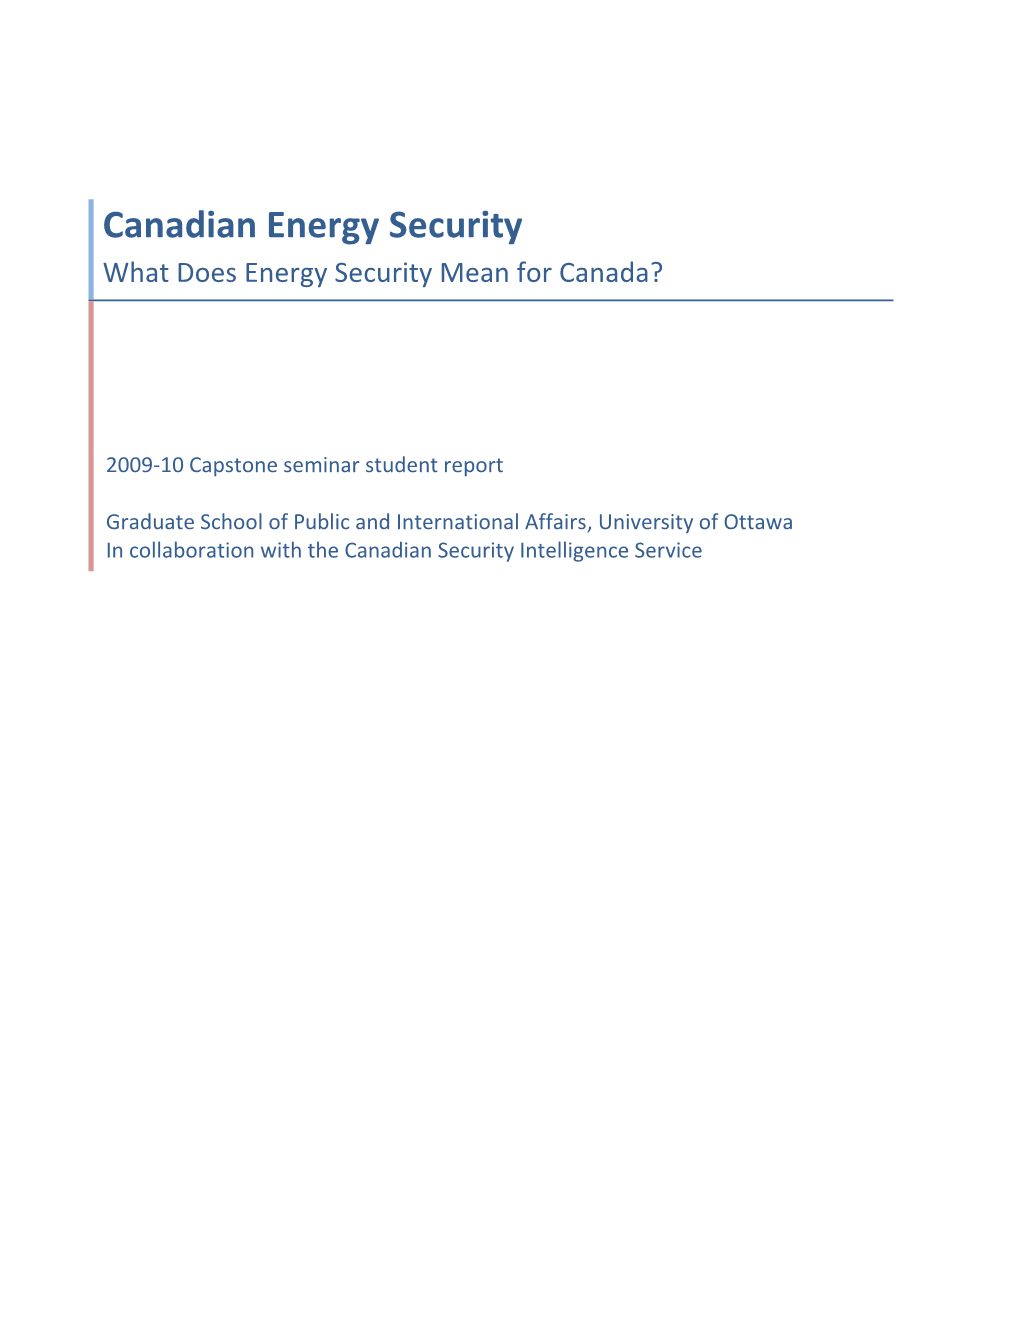 What Does Energy Security Mean for Canada?